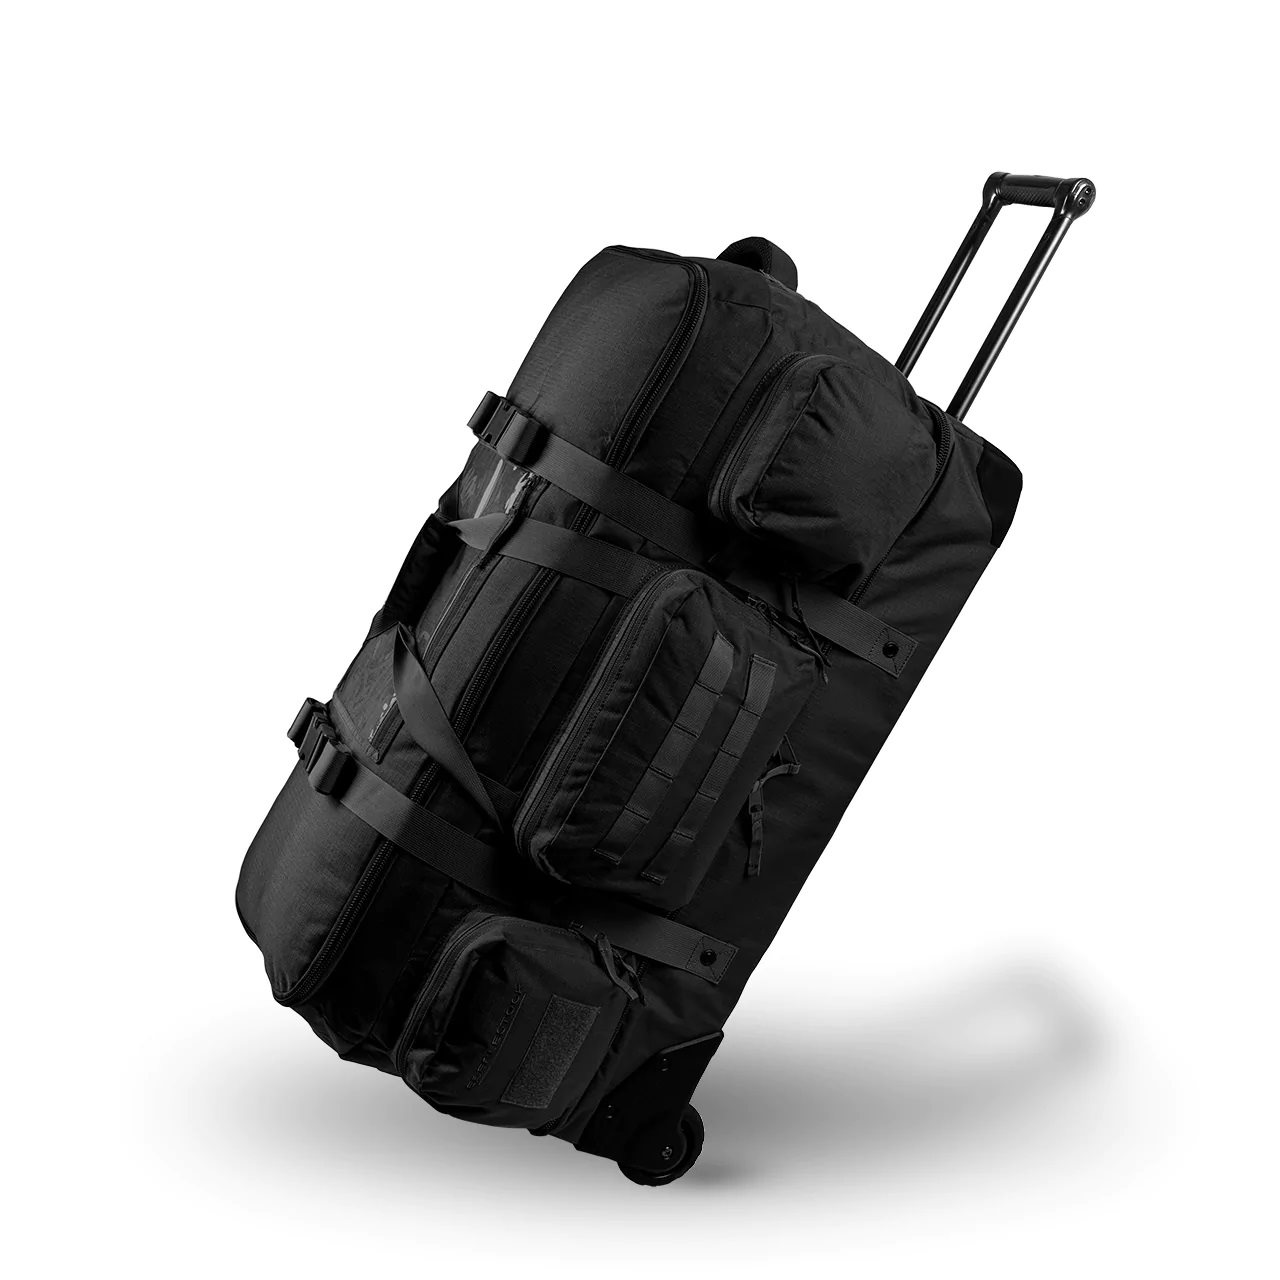 Save time at security with the innovative ATLAS travel bag » Gadget Flow